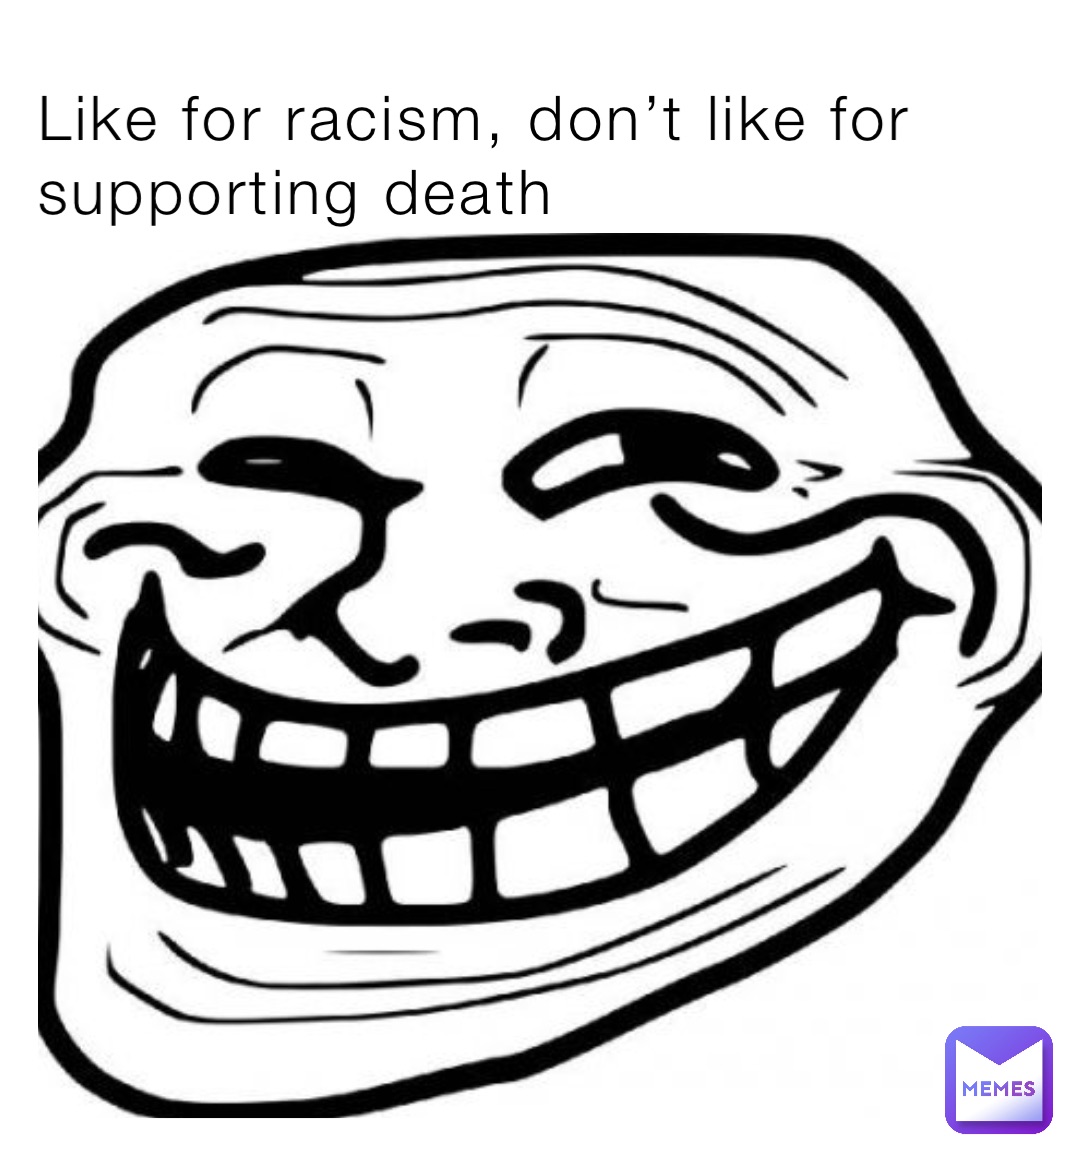 Like for racism, don’t like for supporting death